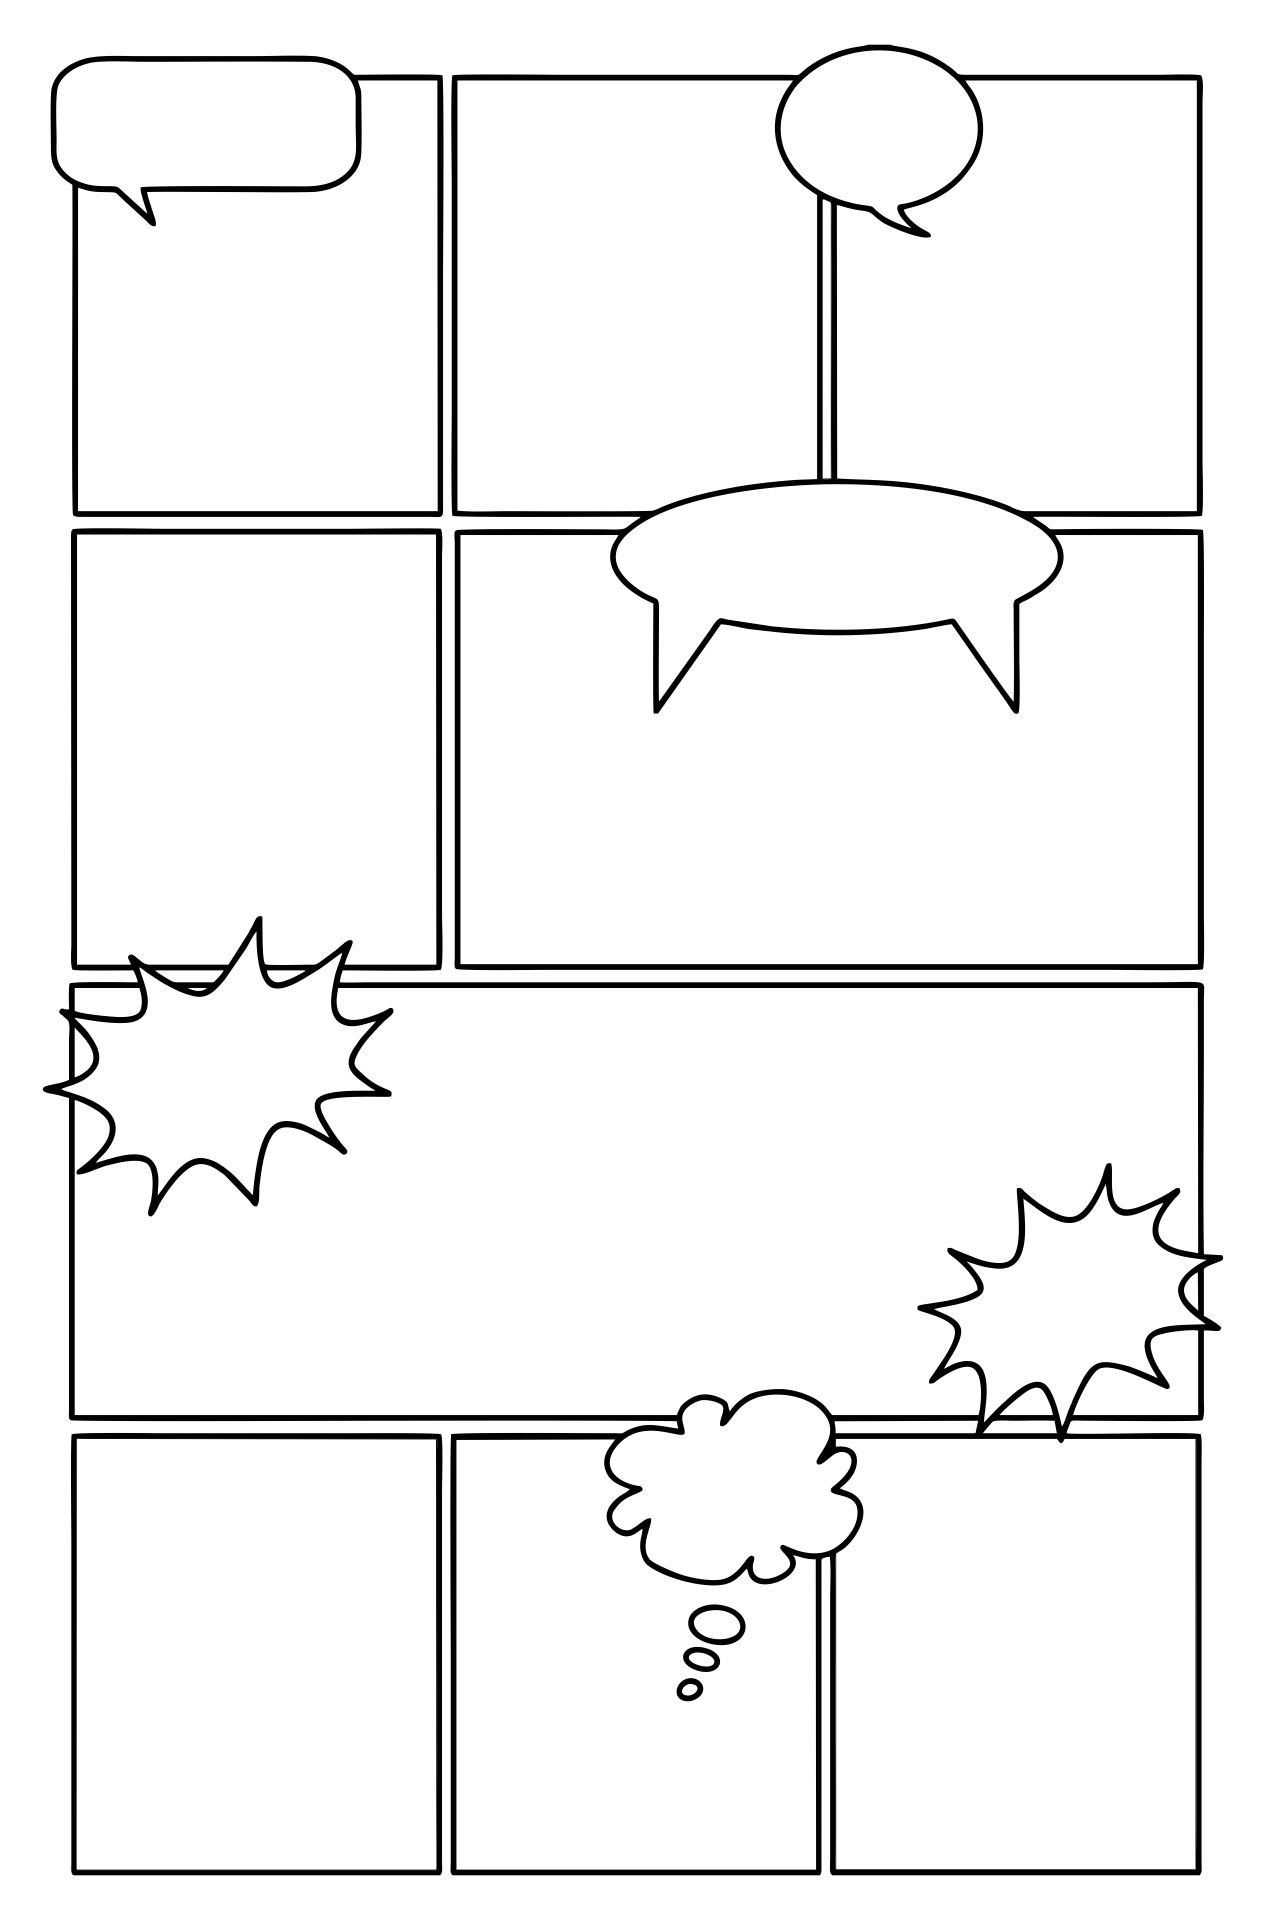 Comic Strip Template With Speech Bubbles